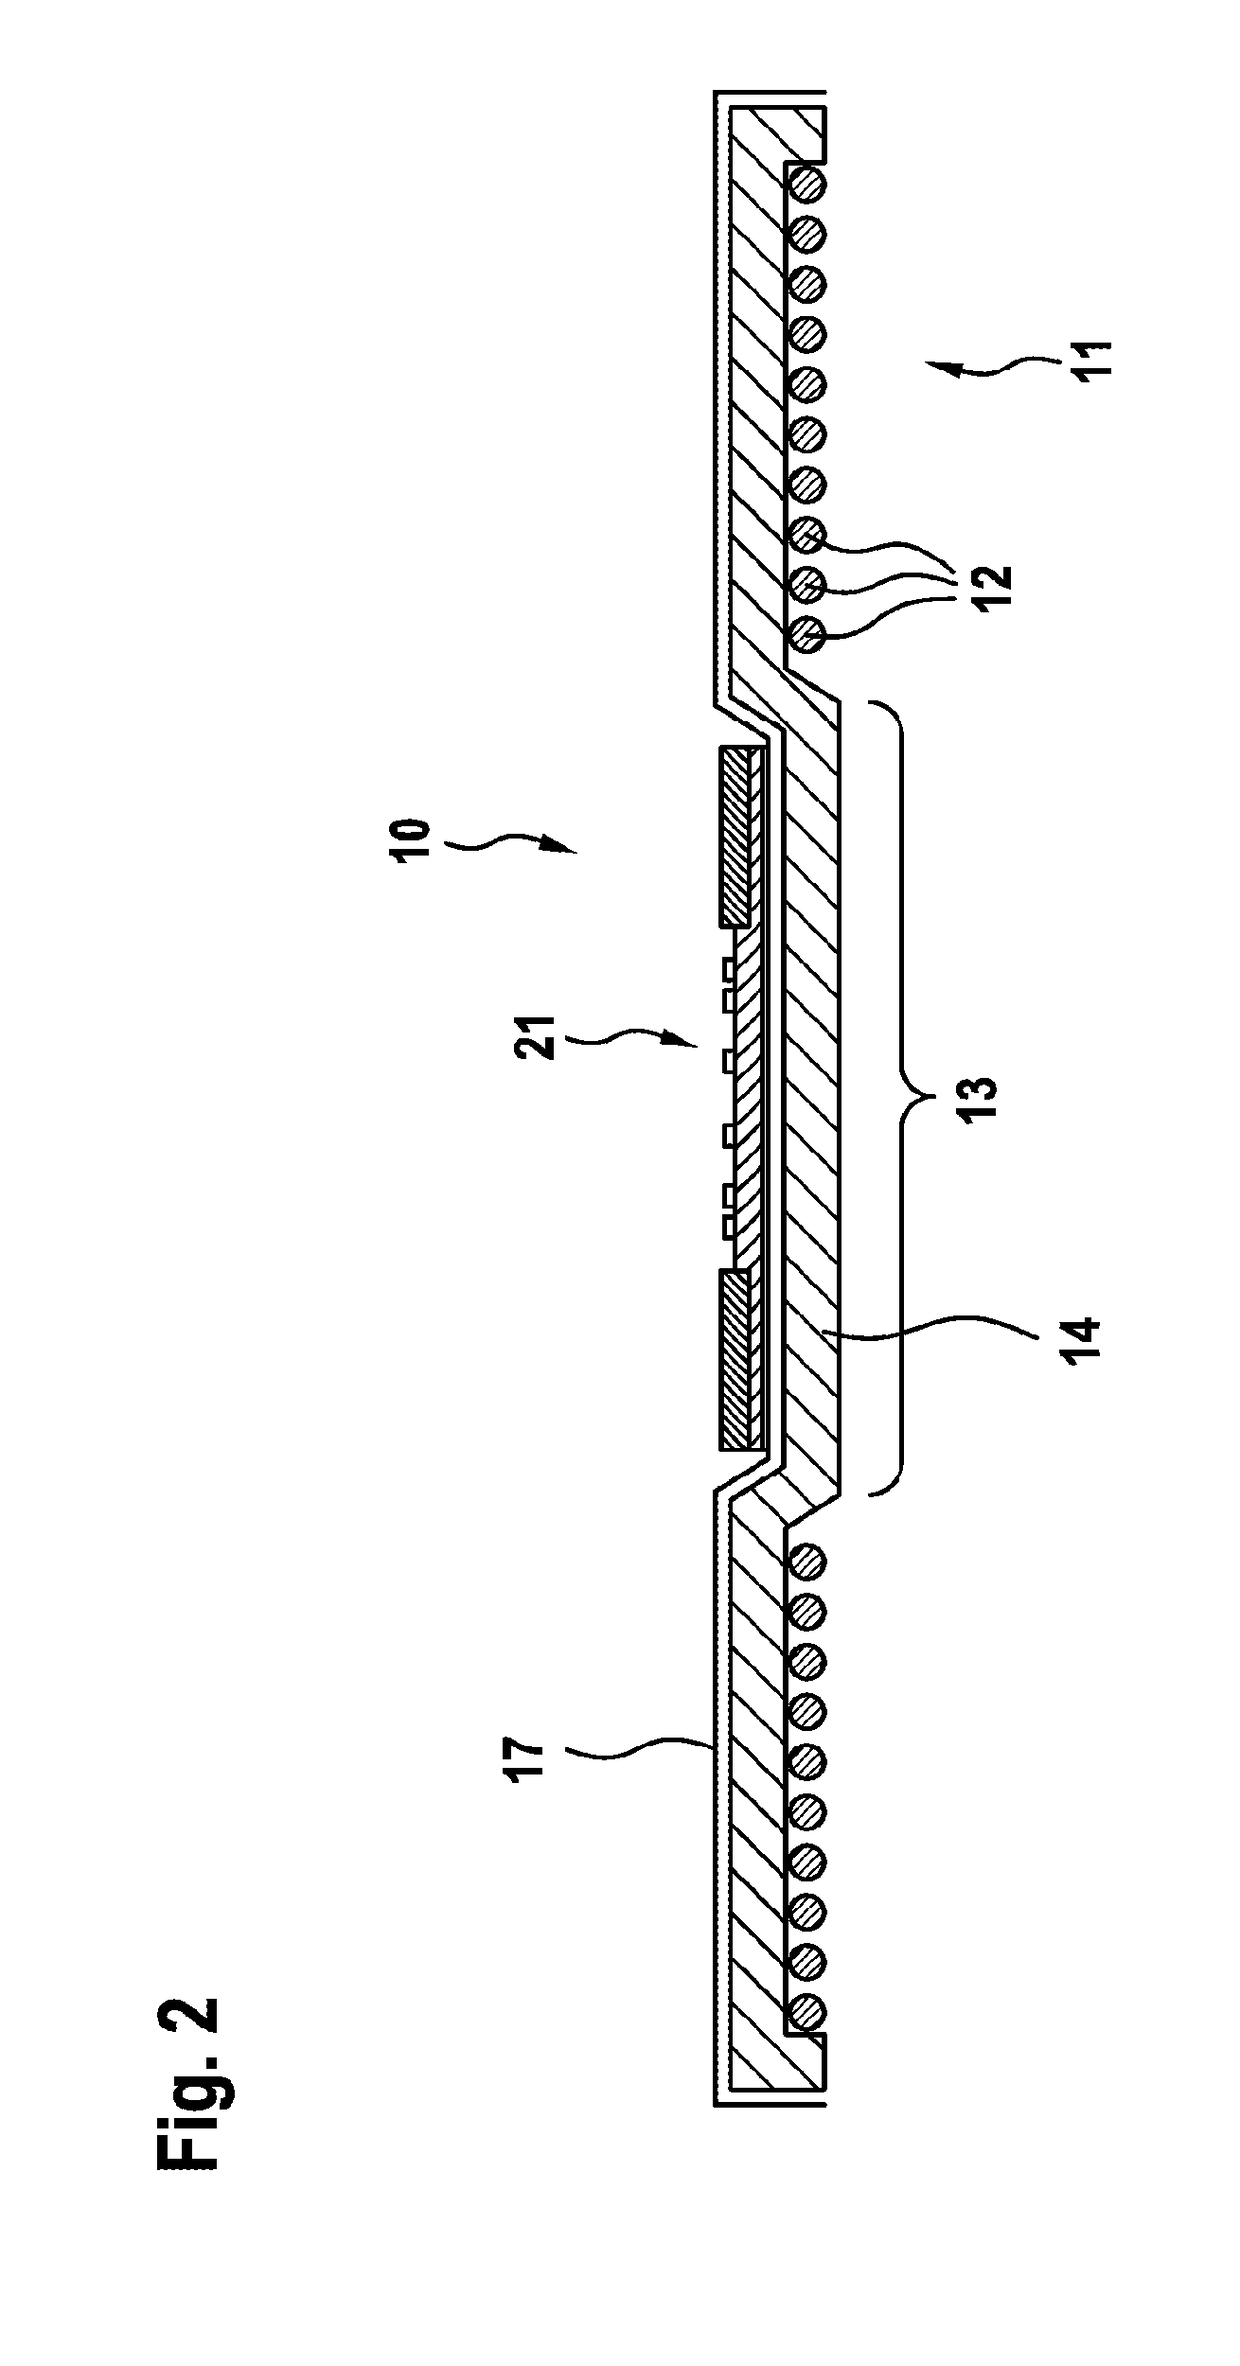 Transmission coil for the inductive transfer of energy